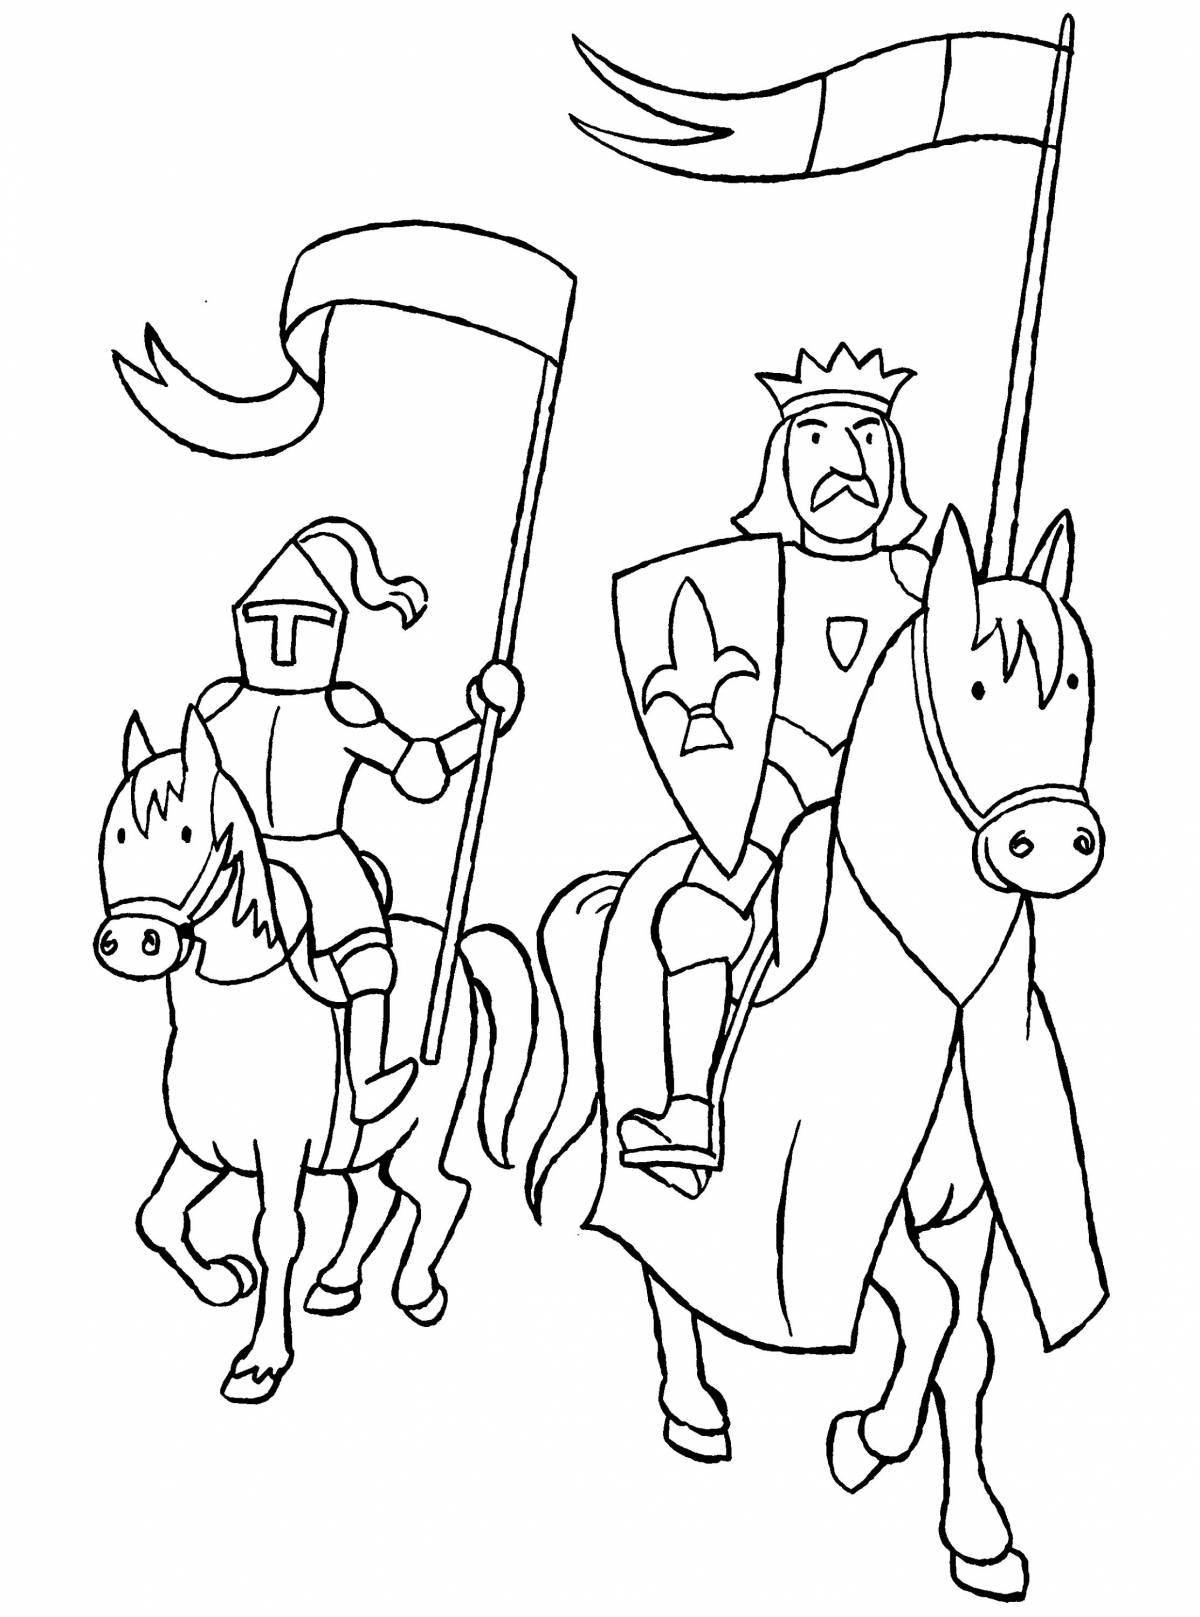 Glorious knight coloring book